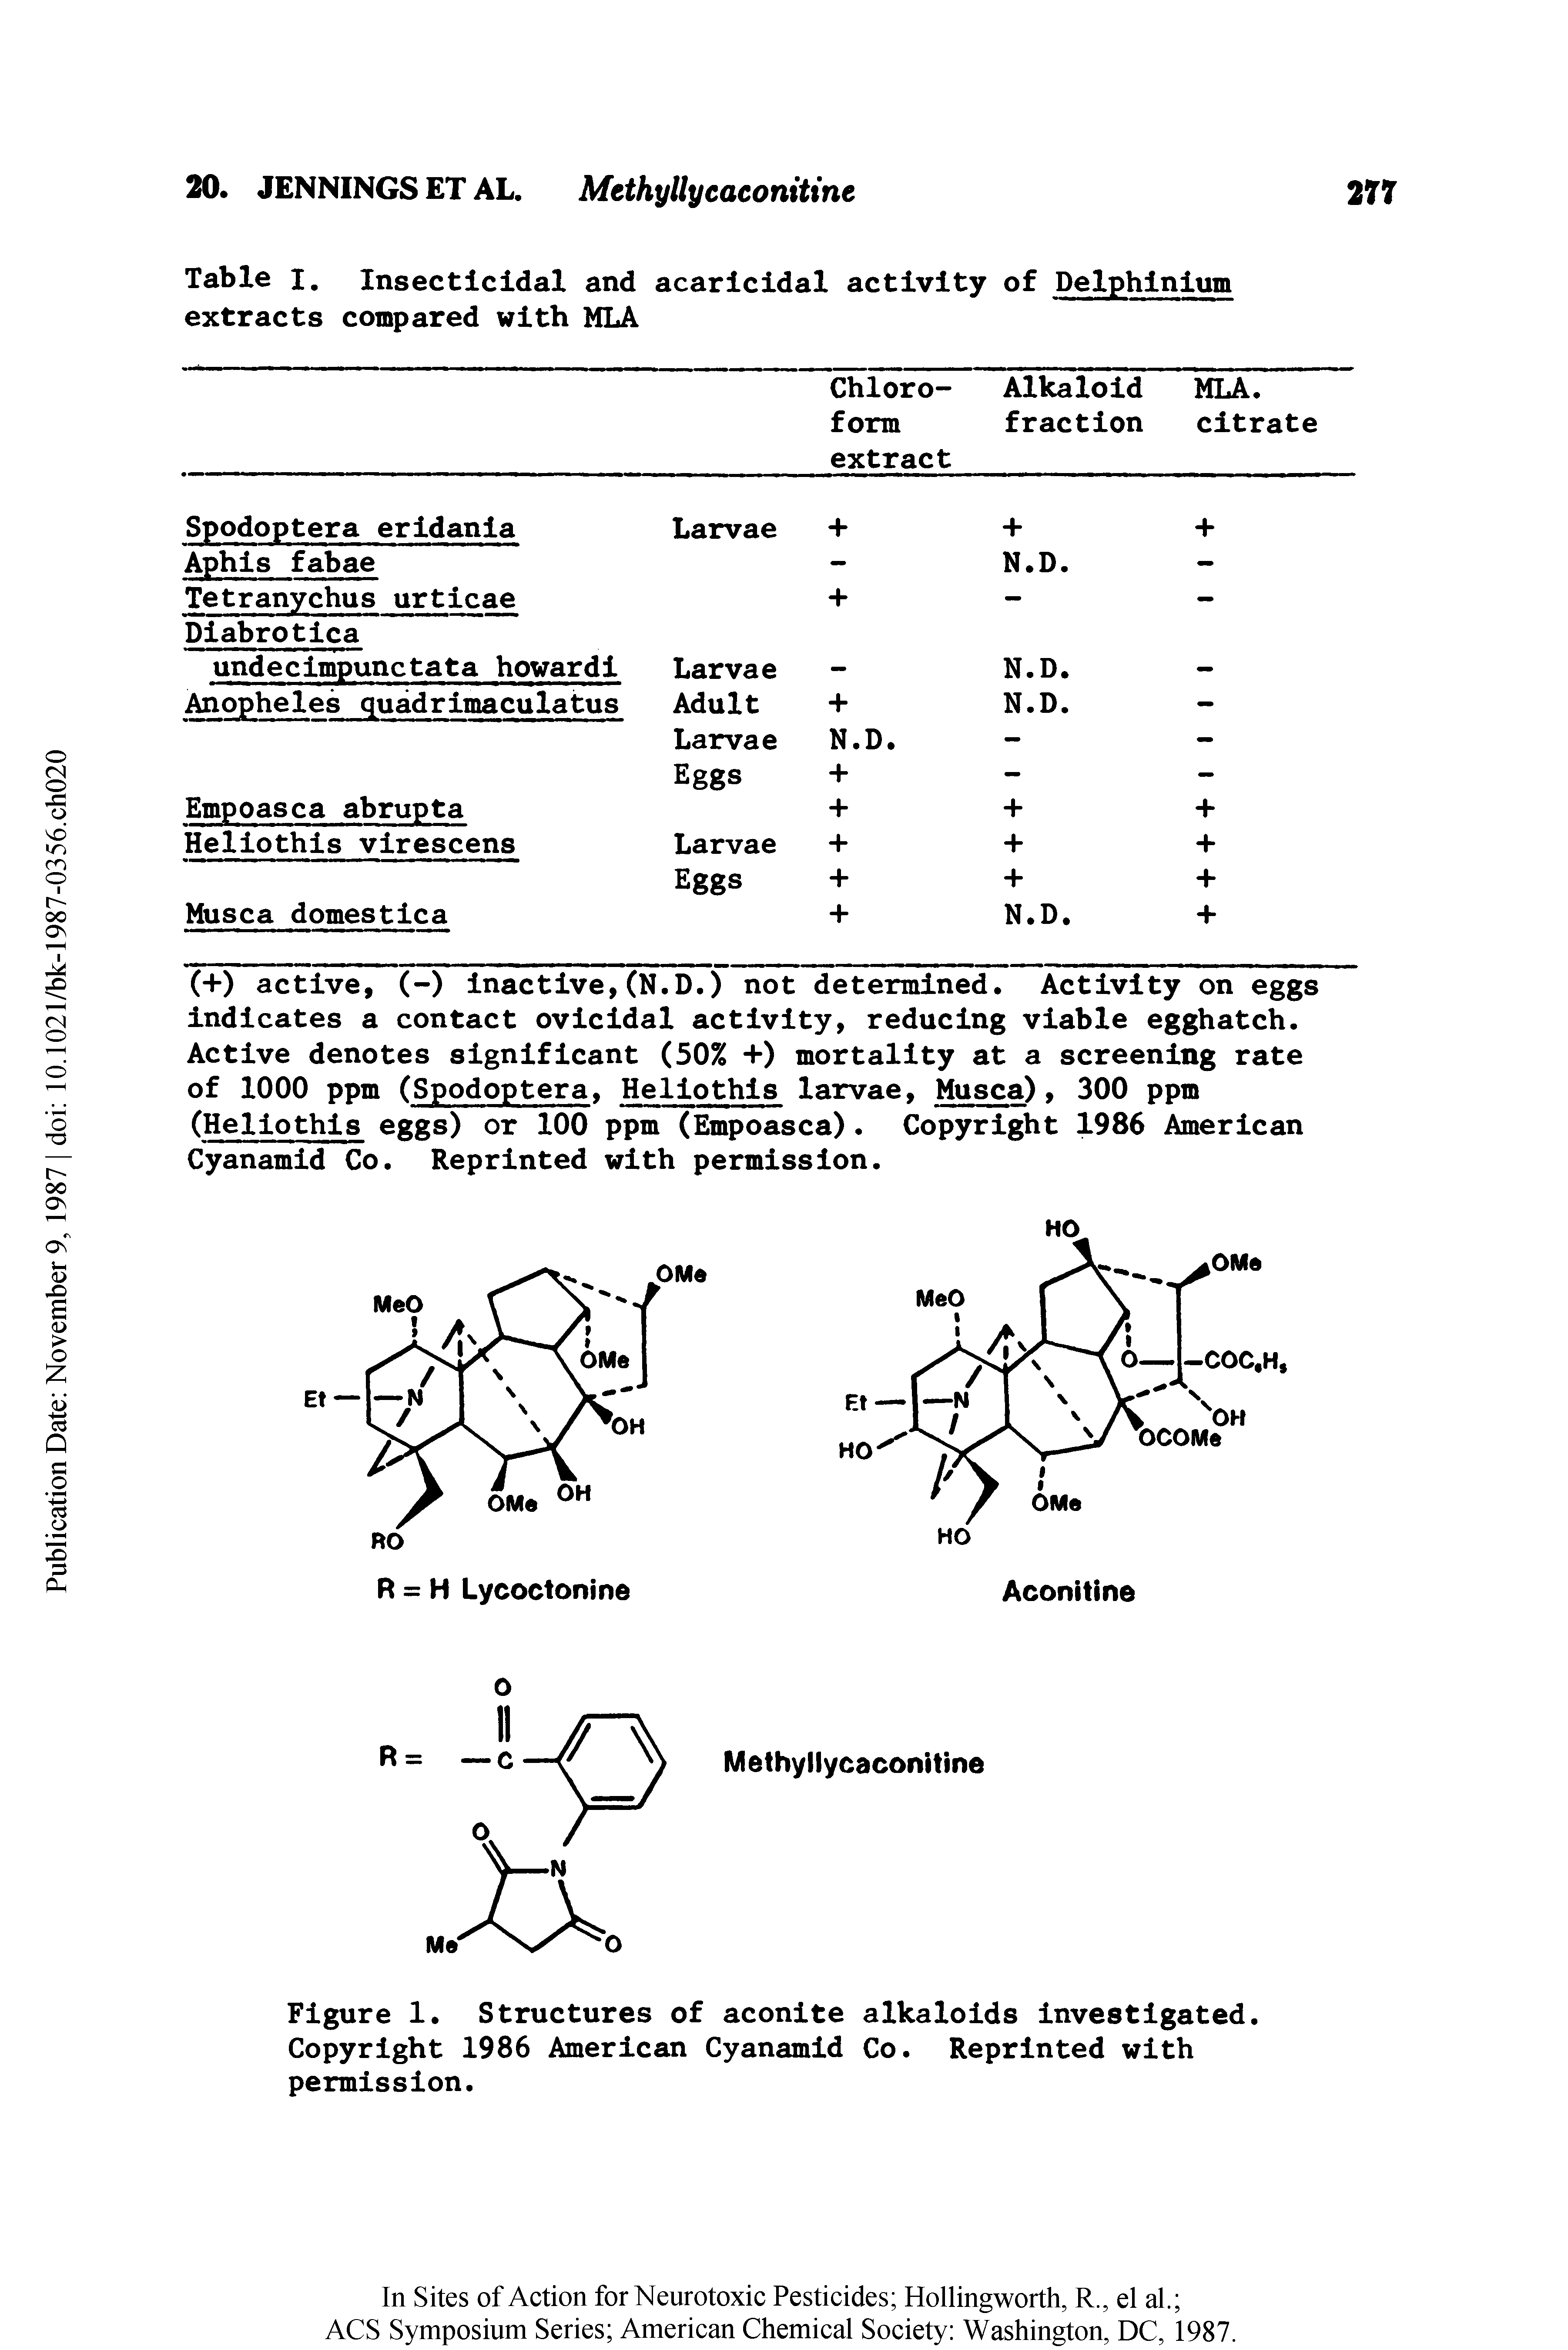 Figure 1. Structures of aconite alkaloids investigated. Copyright 1986 American Cyanamid Co. Reprinted with permission.